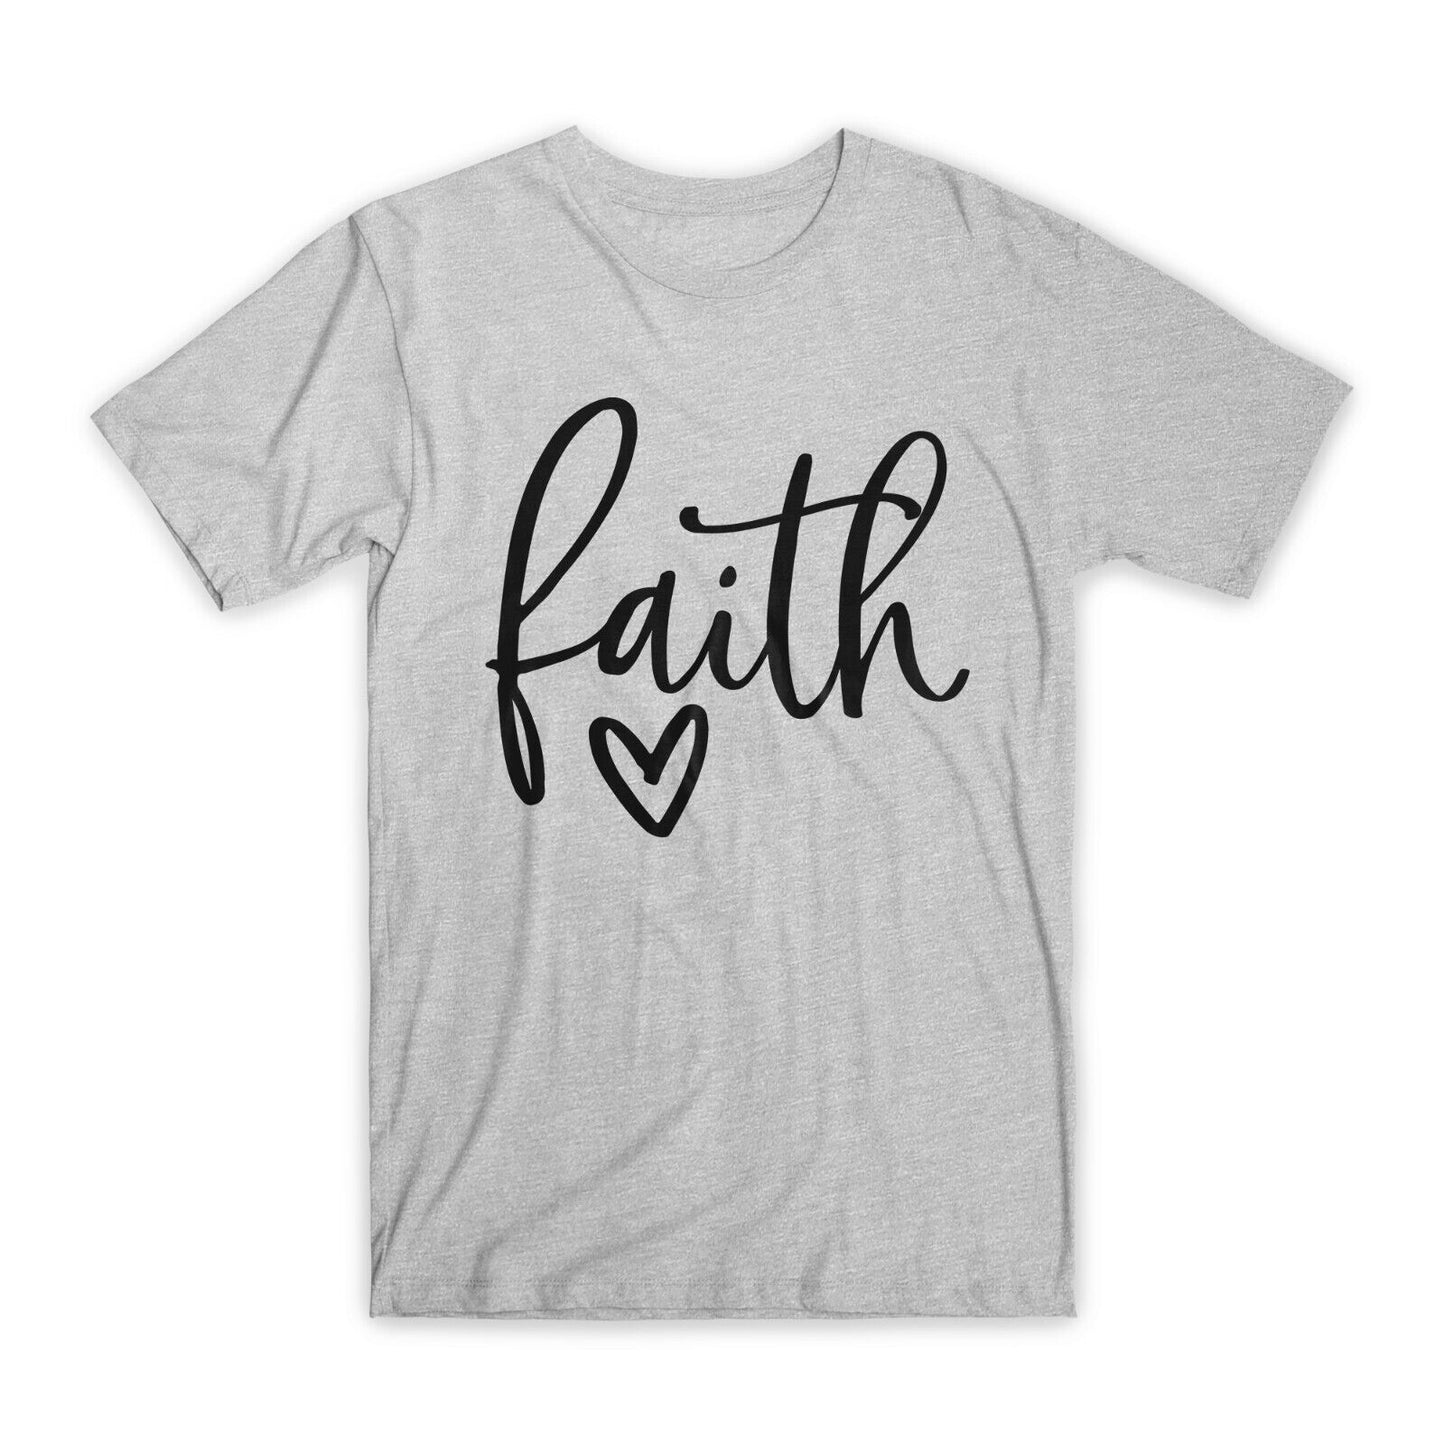 Faith Heart Printed T-Shirt Premium Soft Cotton Crew Neck Funny Tees Gifts NEW